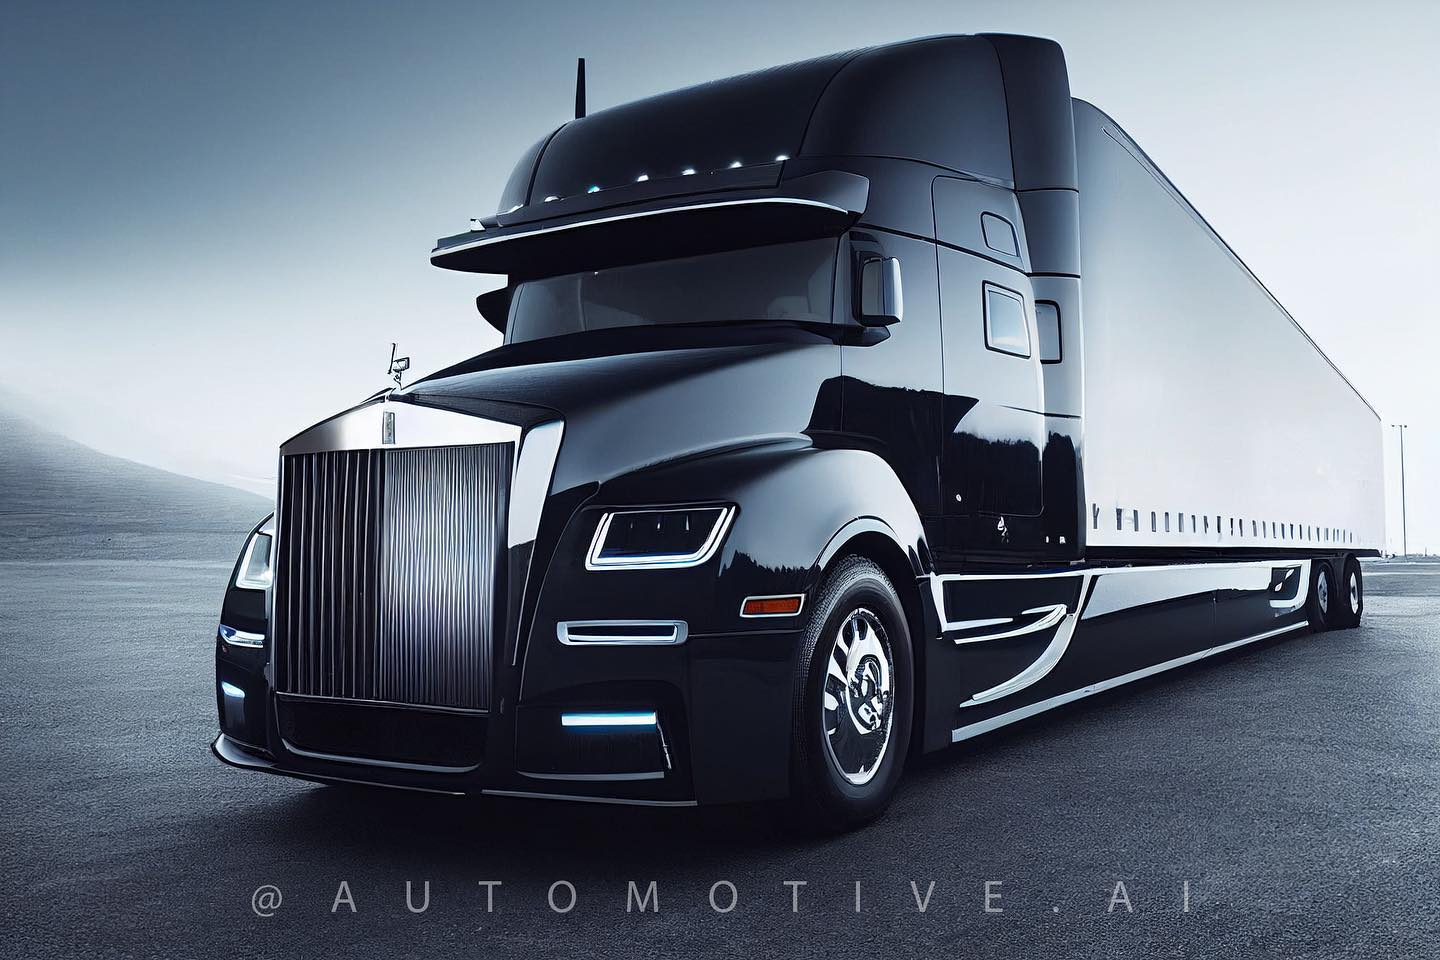 RollsRoyce SemiTrailer Truck Is Merely Wishful Thinking, Although